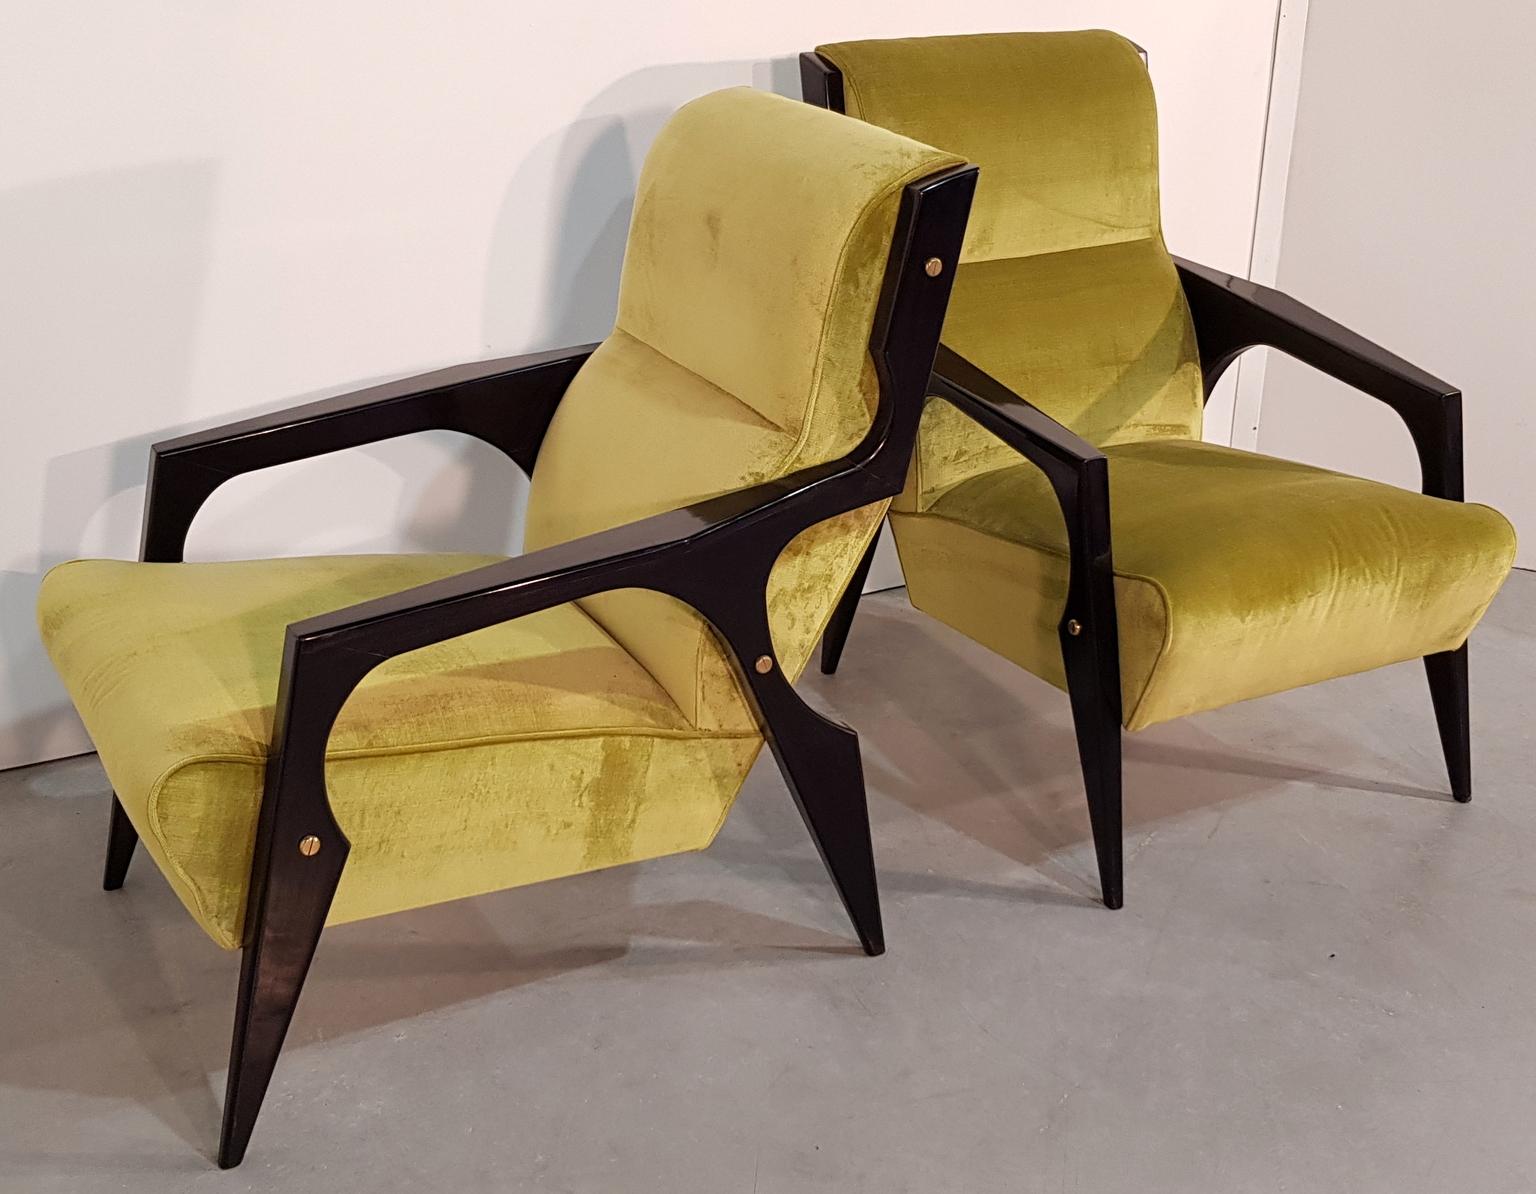 Unique pair of armchairs with black painted polished wood and green textile covered, designed by Gio Ponti, Italy, 1950s.